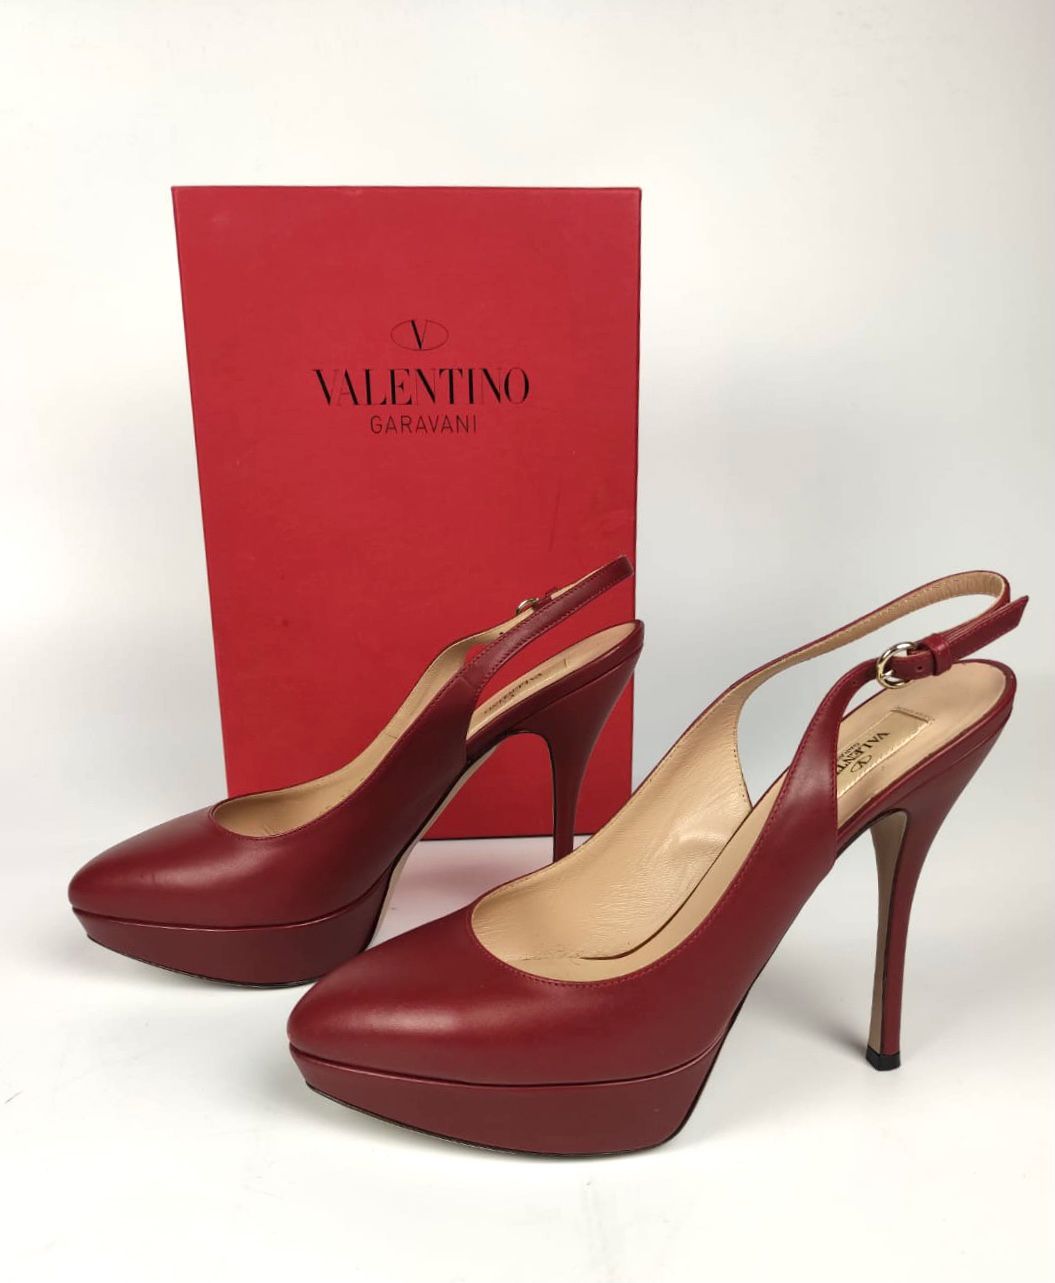 Null VALENTINO Pair of shoes with straps in burgundy leather, platform soles. Si&hellip;